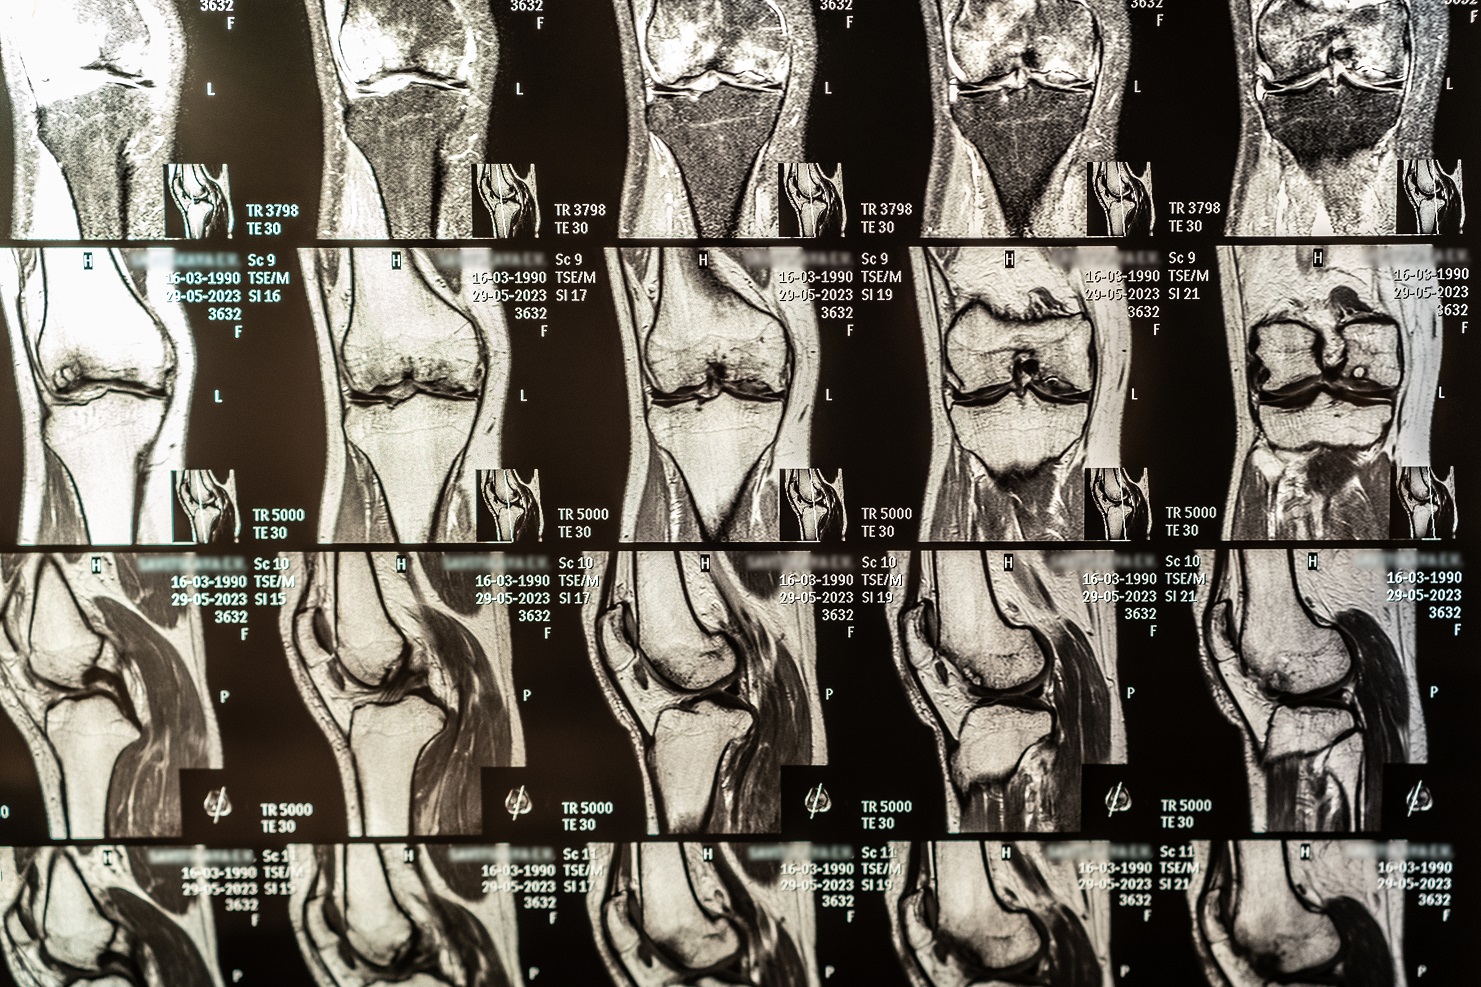 magnetic resonance imaging of human knee joint